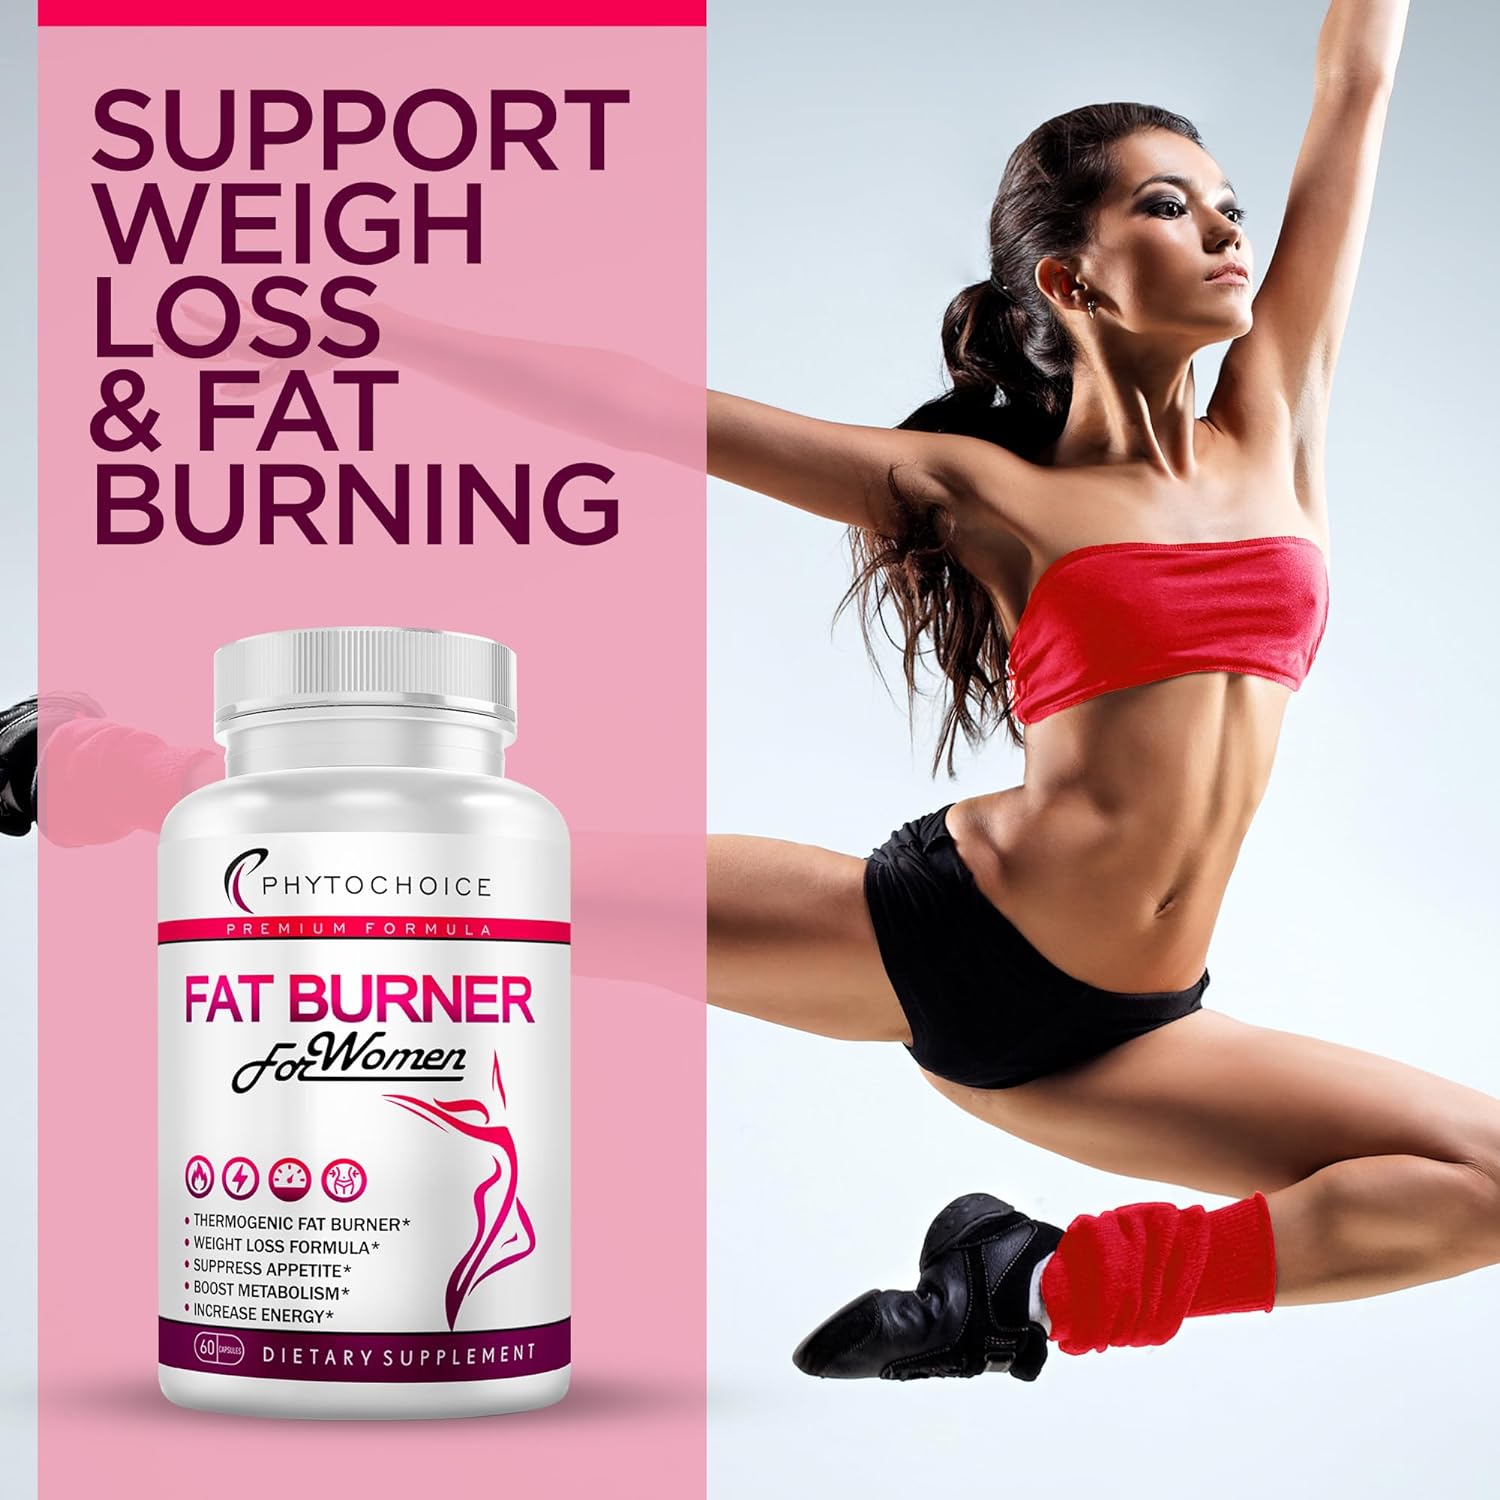 Support Weight loss and burn fat